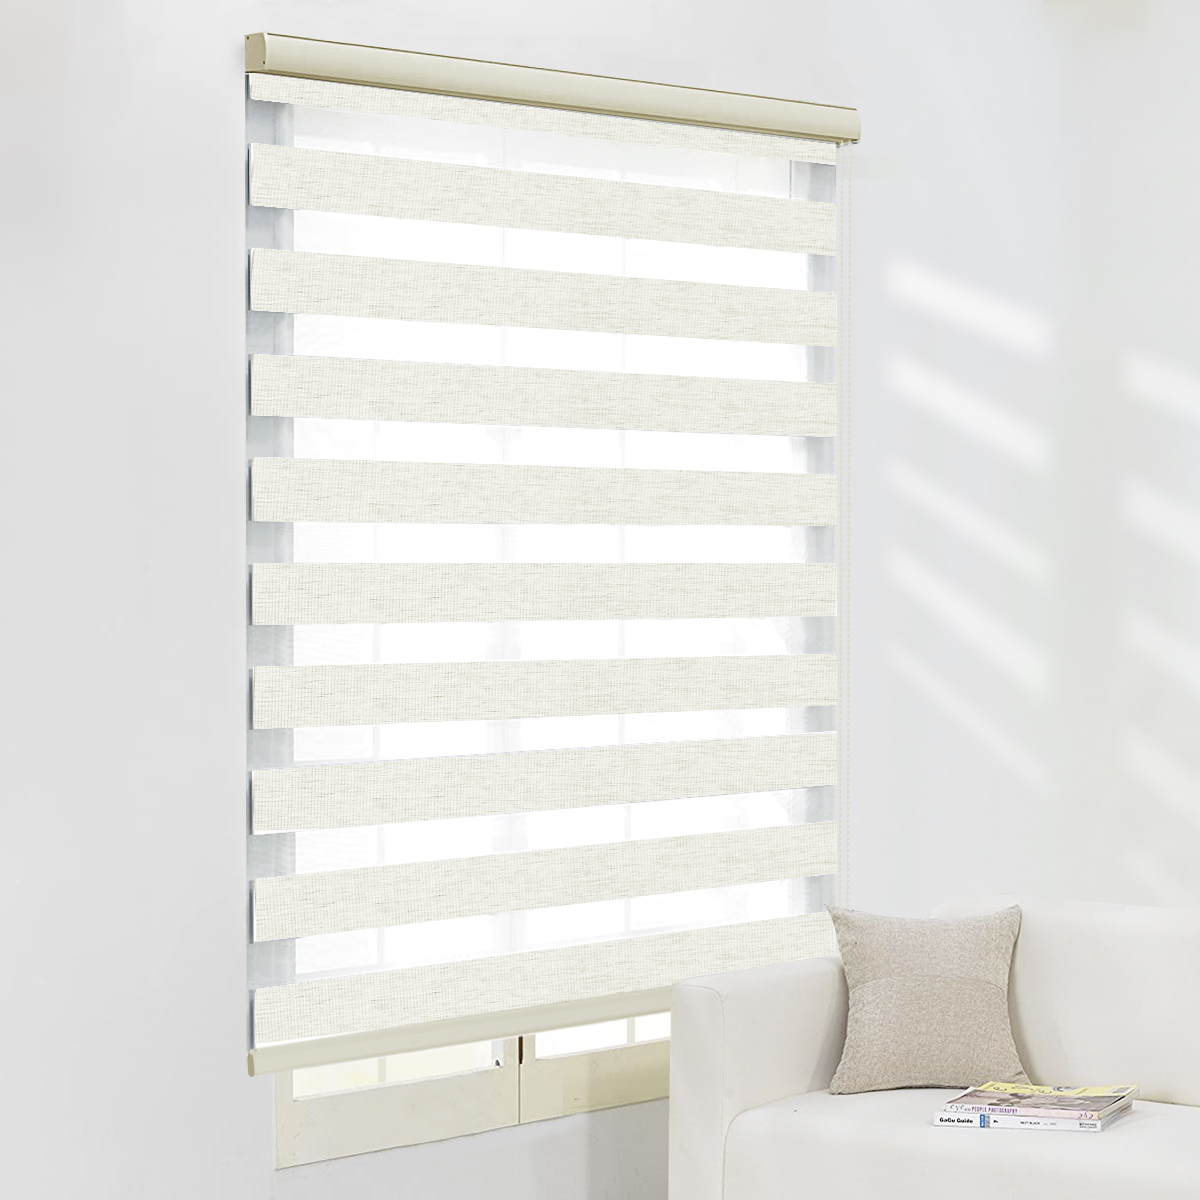 Zebra Dual Layer Shades Roller Window Blinds, Sheer Or Privacy Light Control For Day And Night